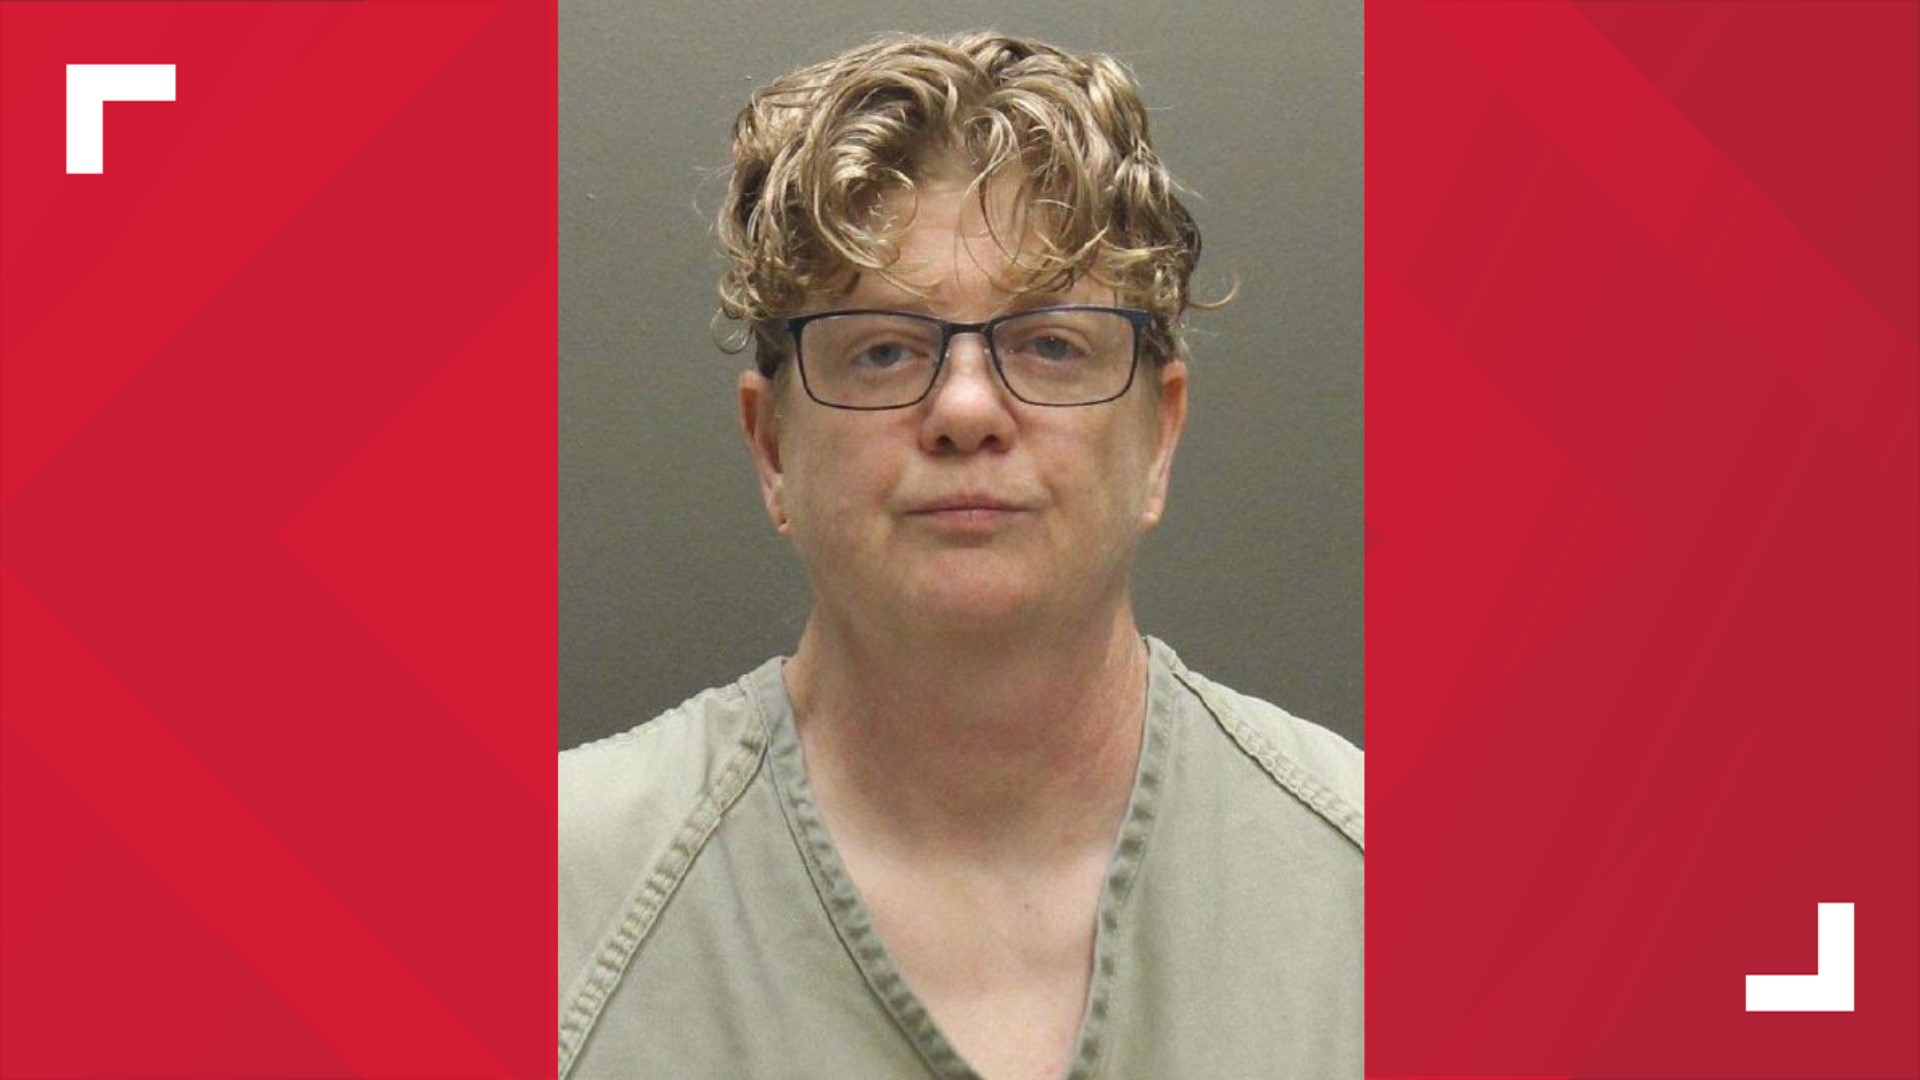 On March 17, a jury convicted Monica Justice on four counts following a two-week trial where she chose to defend herself.